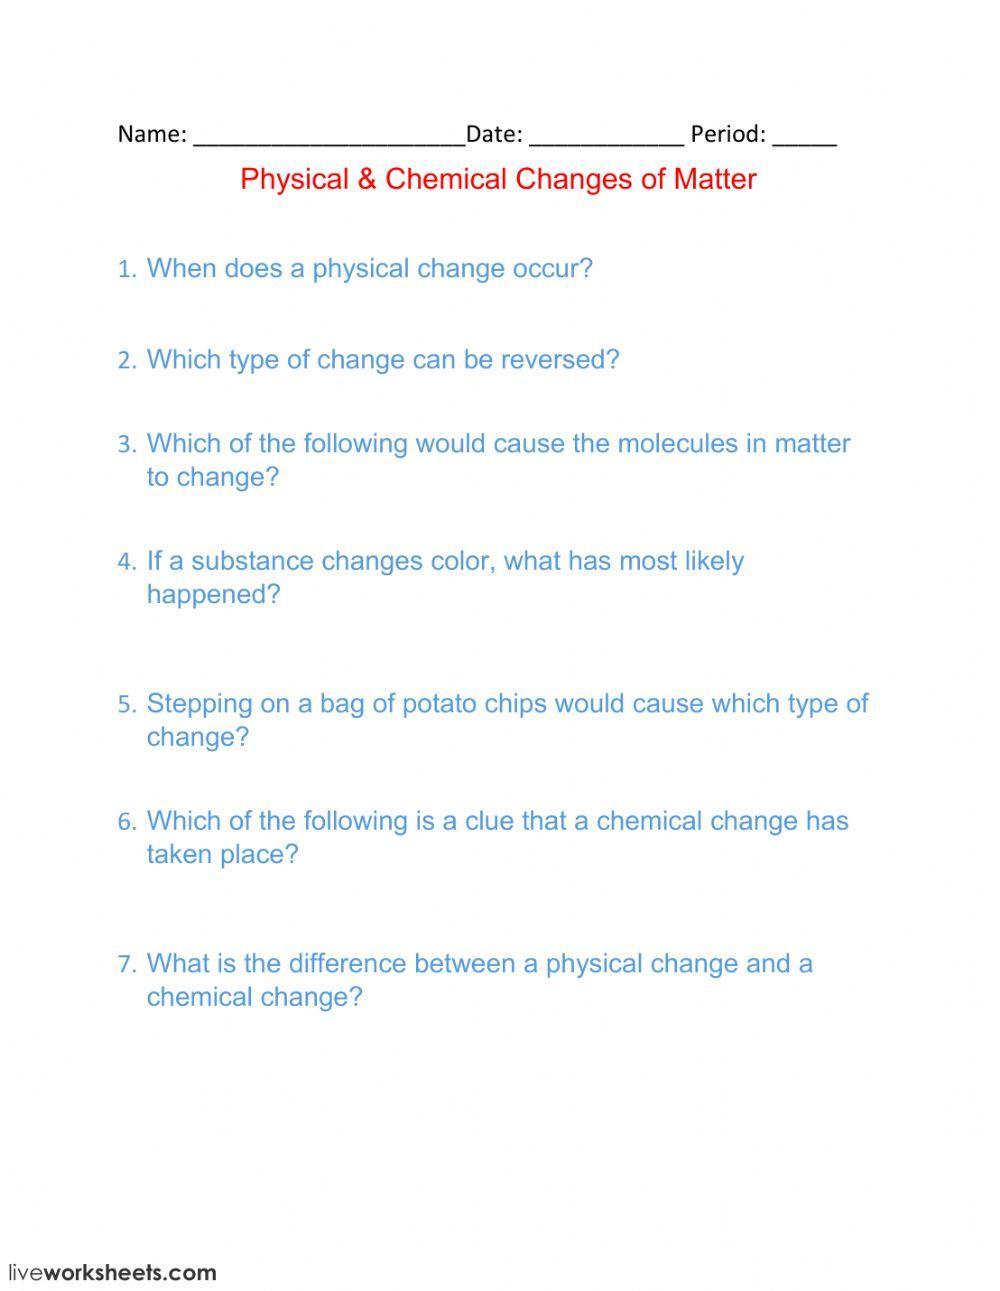 Physical - Chemical Changes of Matter